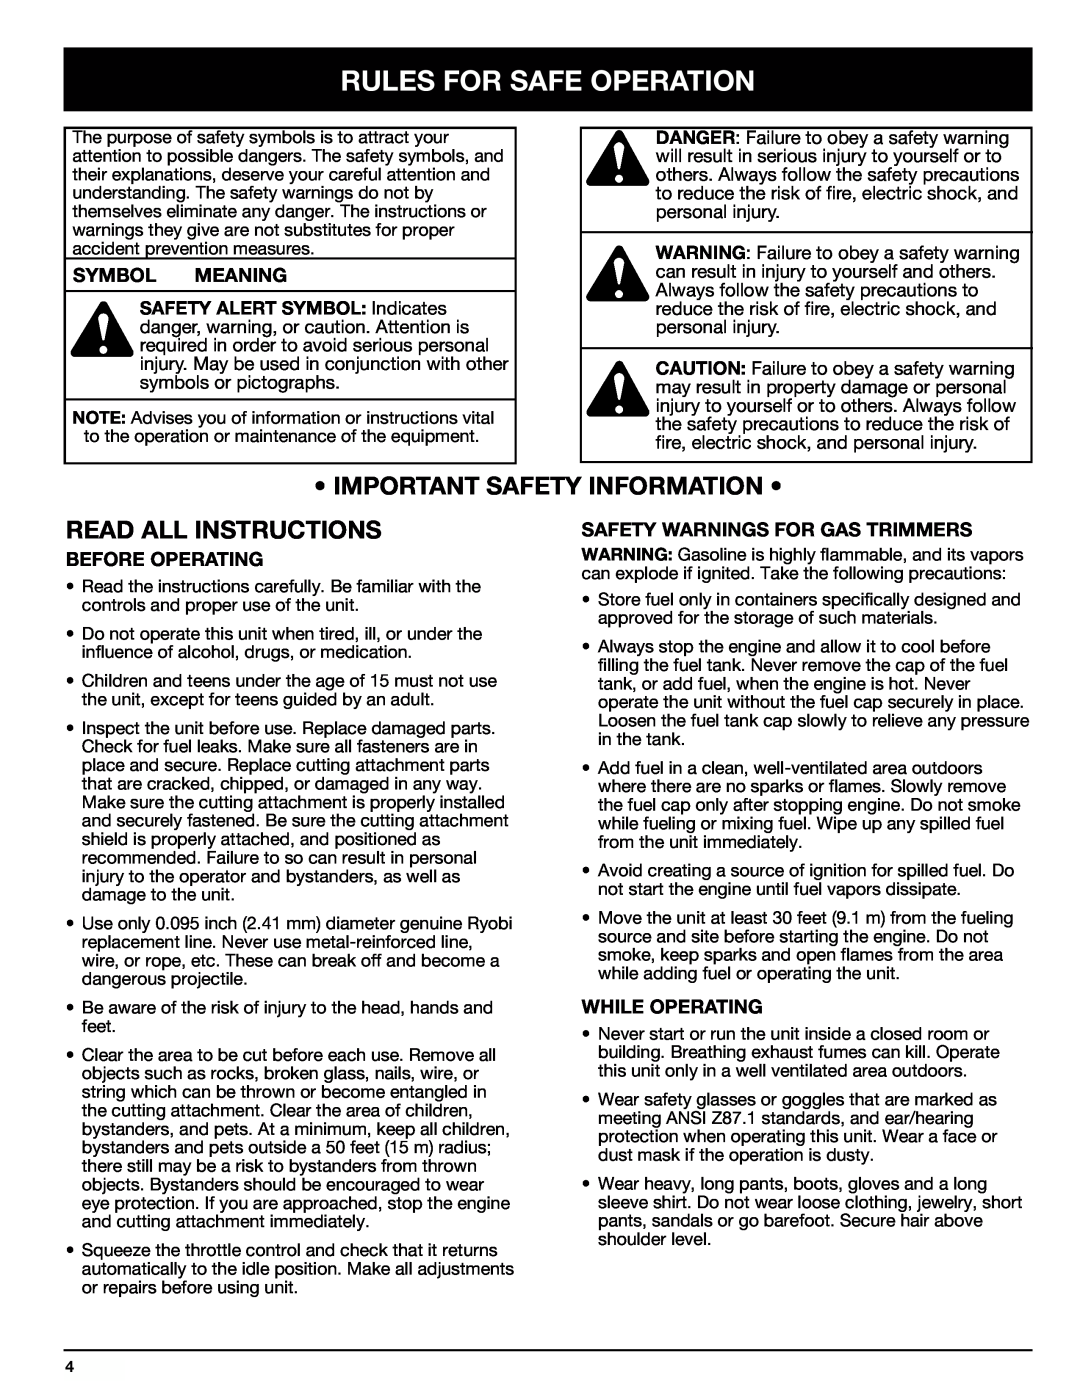 Ryobi 890r Rules For Safe Operation, Important Safety Information, Read All Instructions, Symbol Meaning, Before Operating 